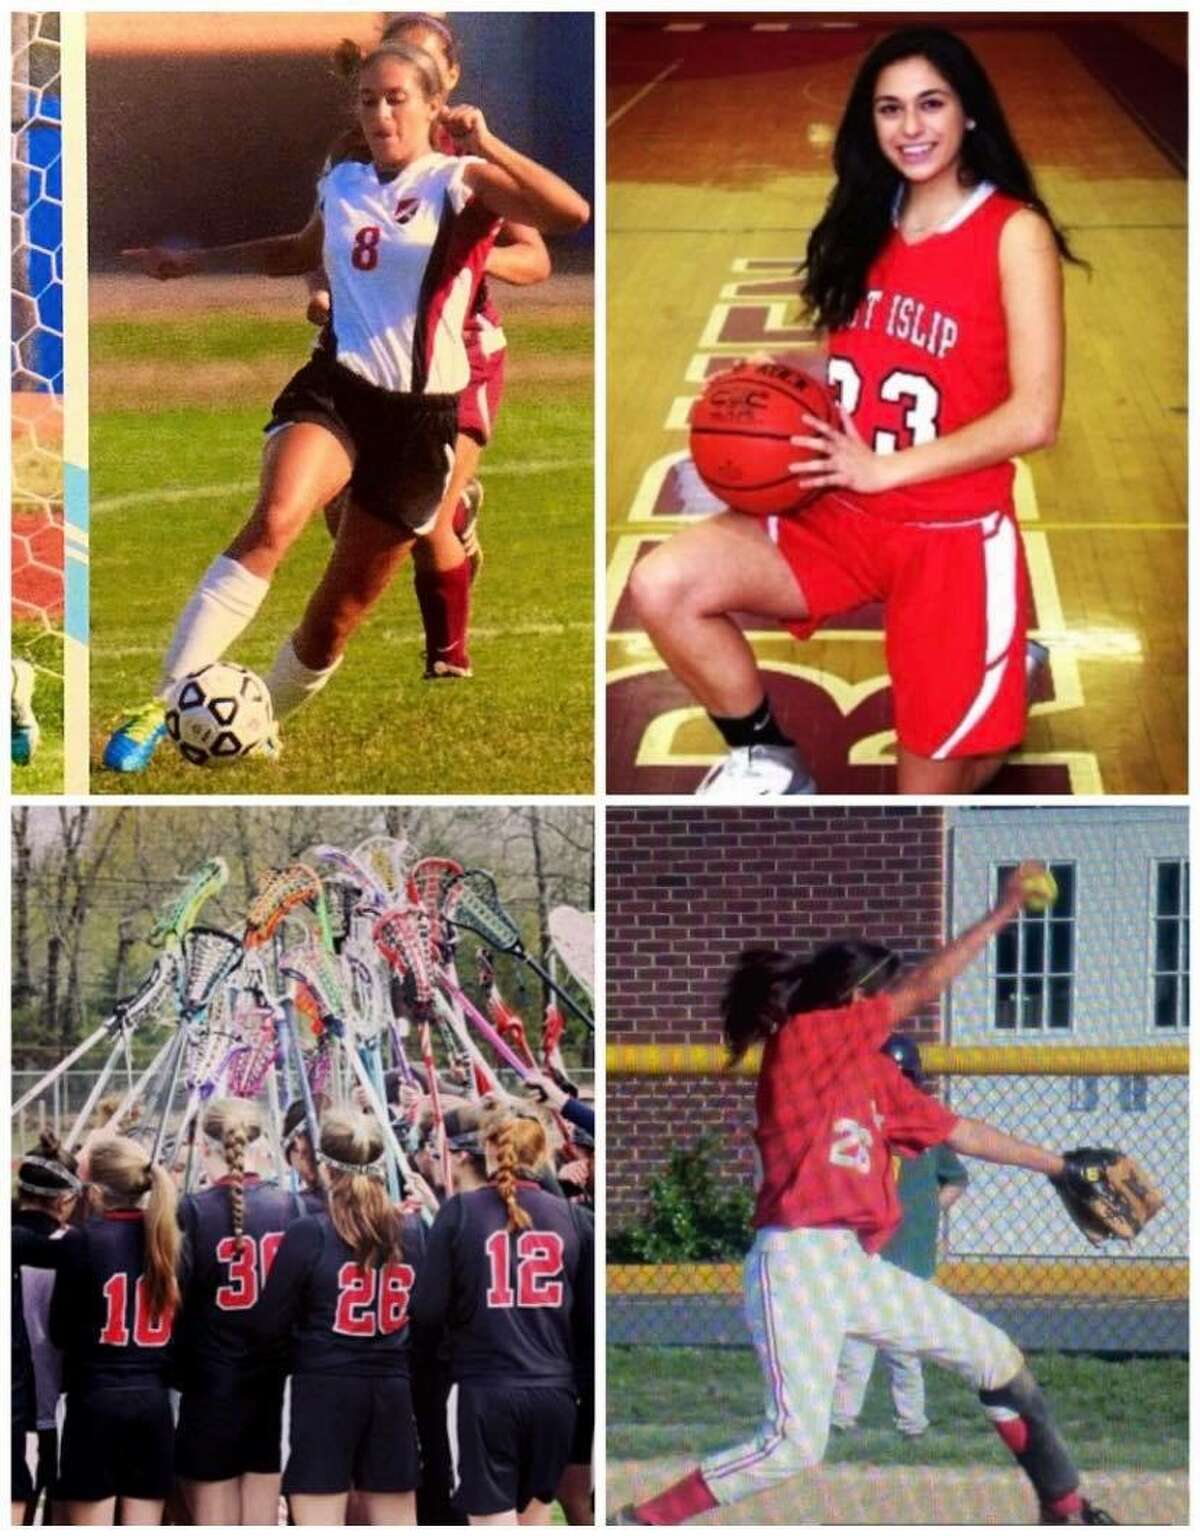 5. I have played many sports throughout my life.  (I played club and intramural soccer, lacrosse and volleyball in college.)